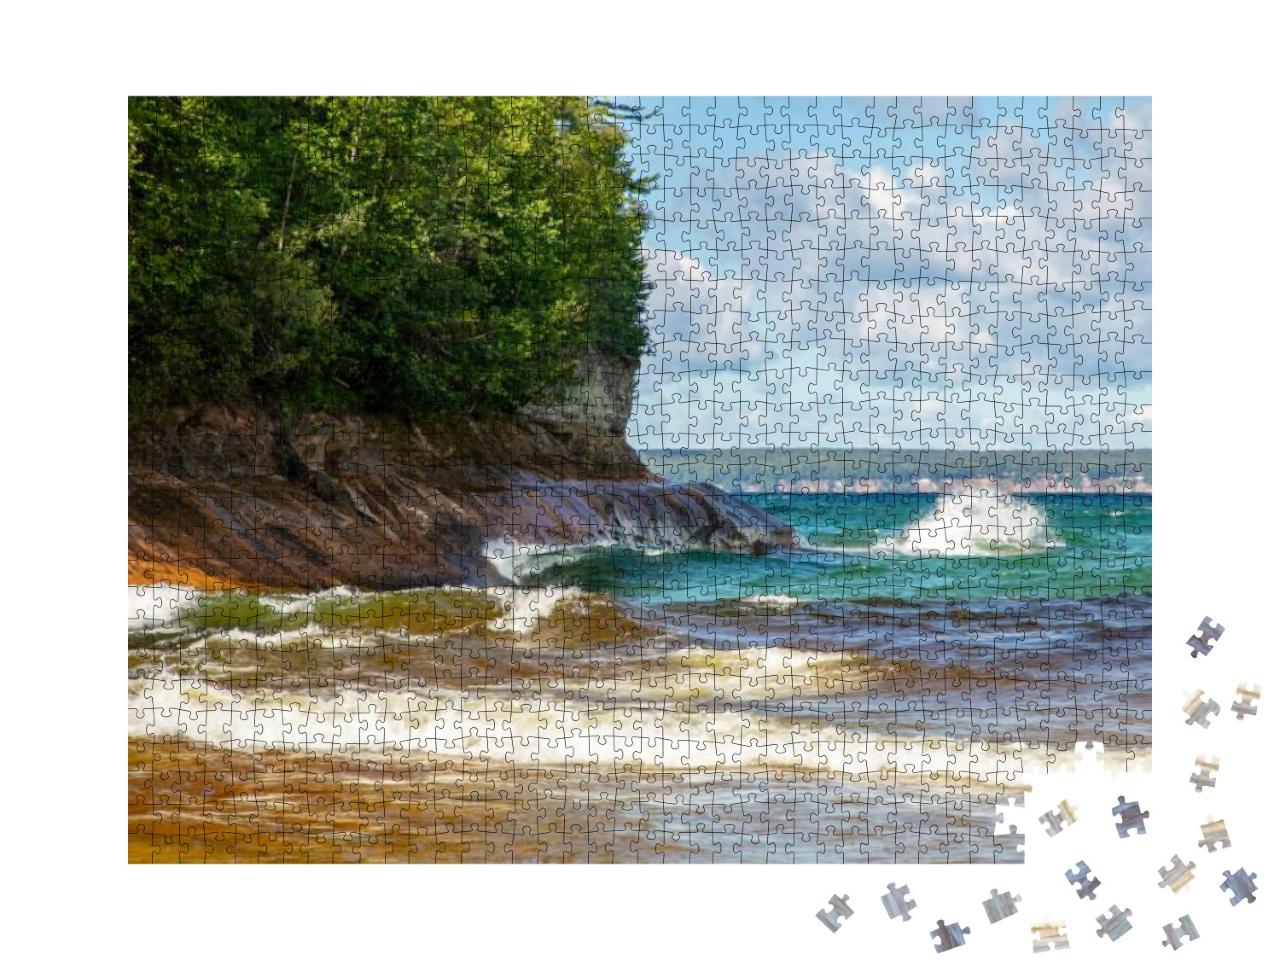 Upper Michigan Lake Superior Showing Beautiful Pictured Rock... Jigsaw Puzzle with 1000 pieces